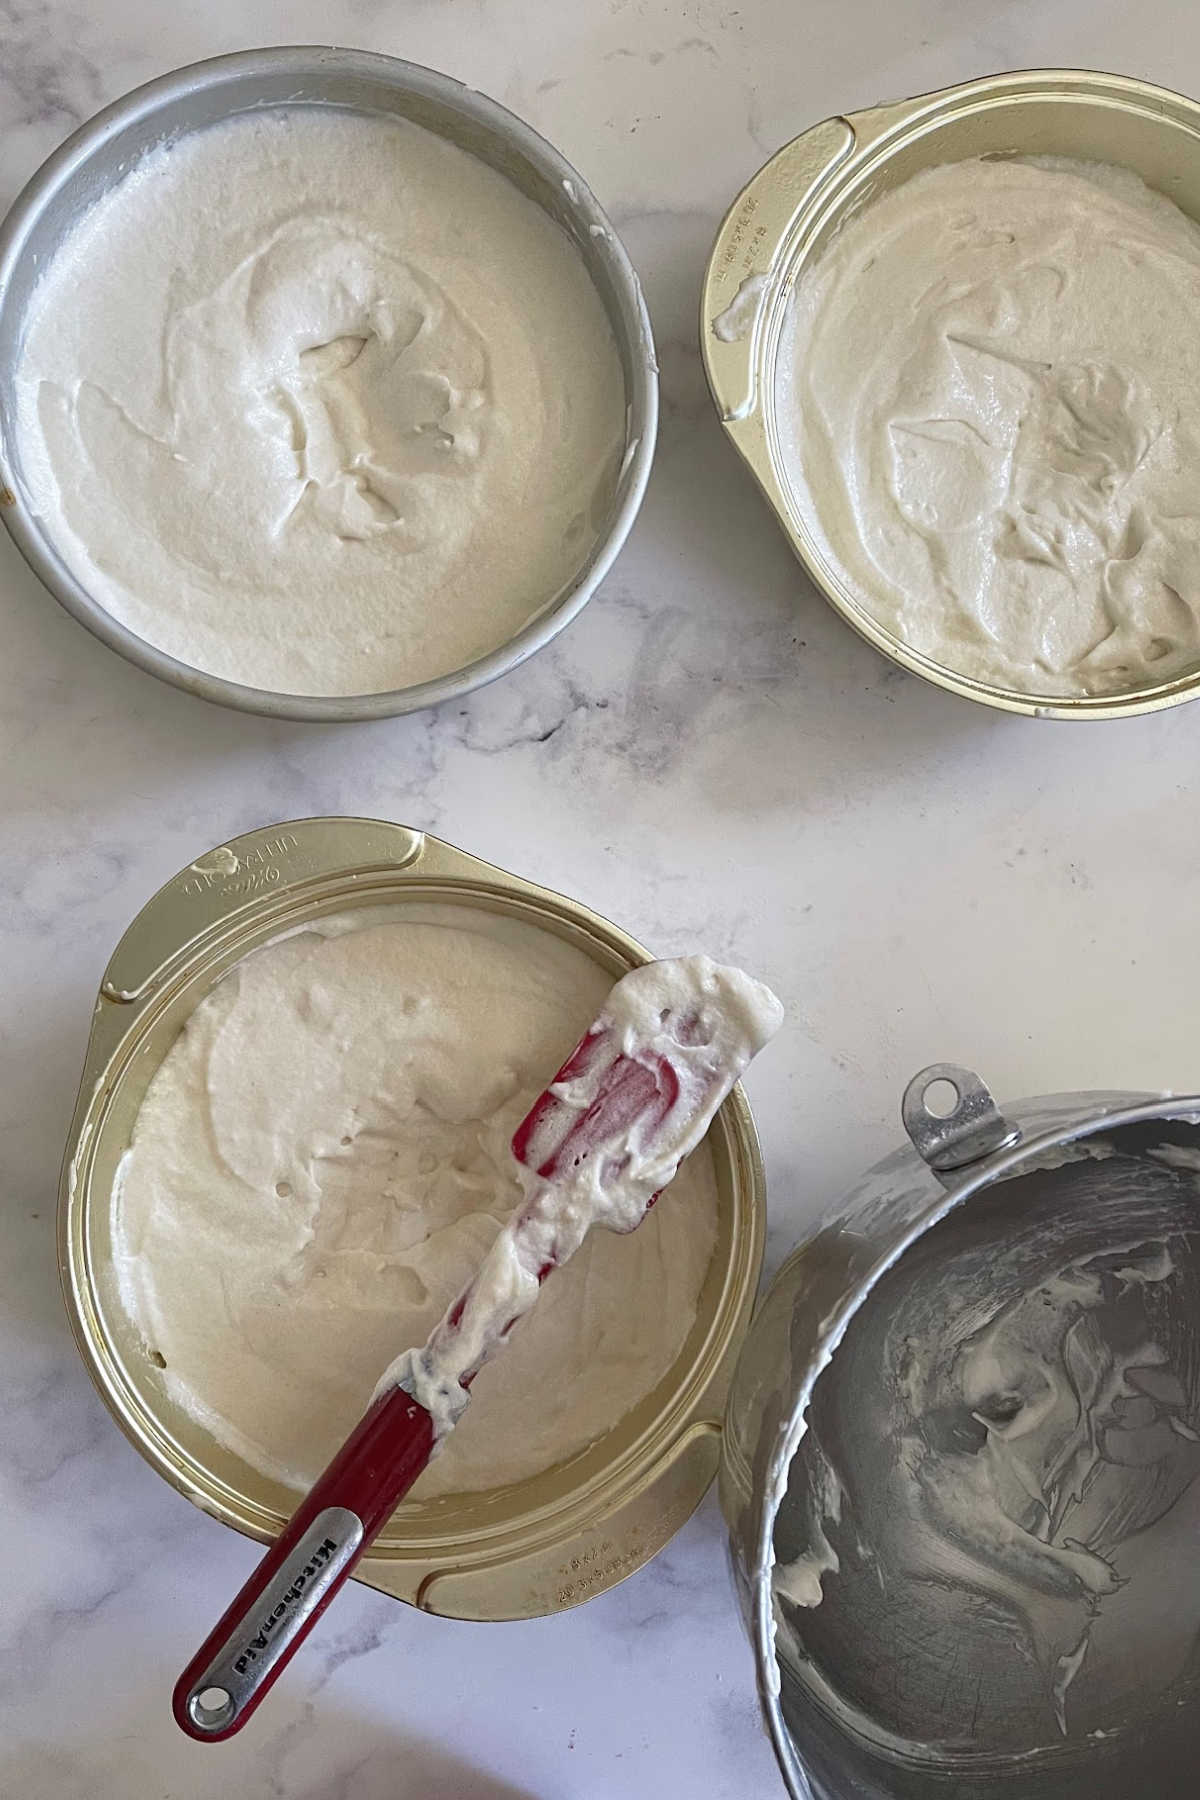 Cake batter is separated into 3 cake pans and ready to bake.